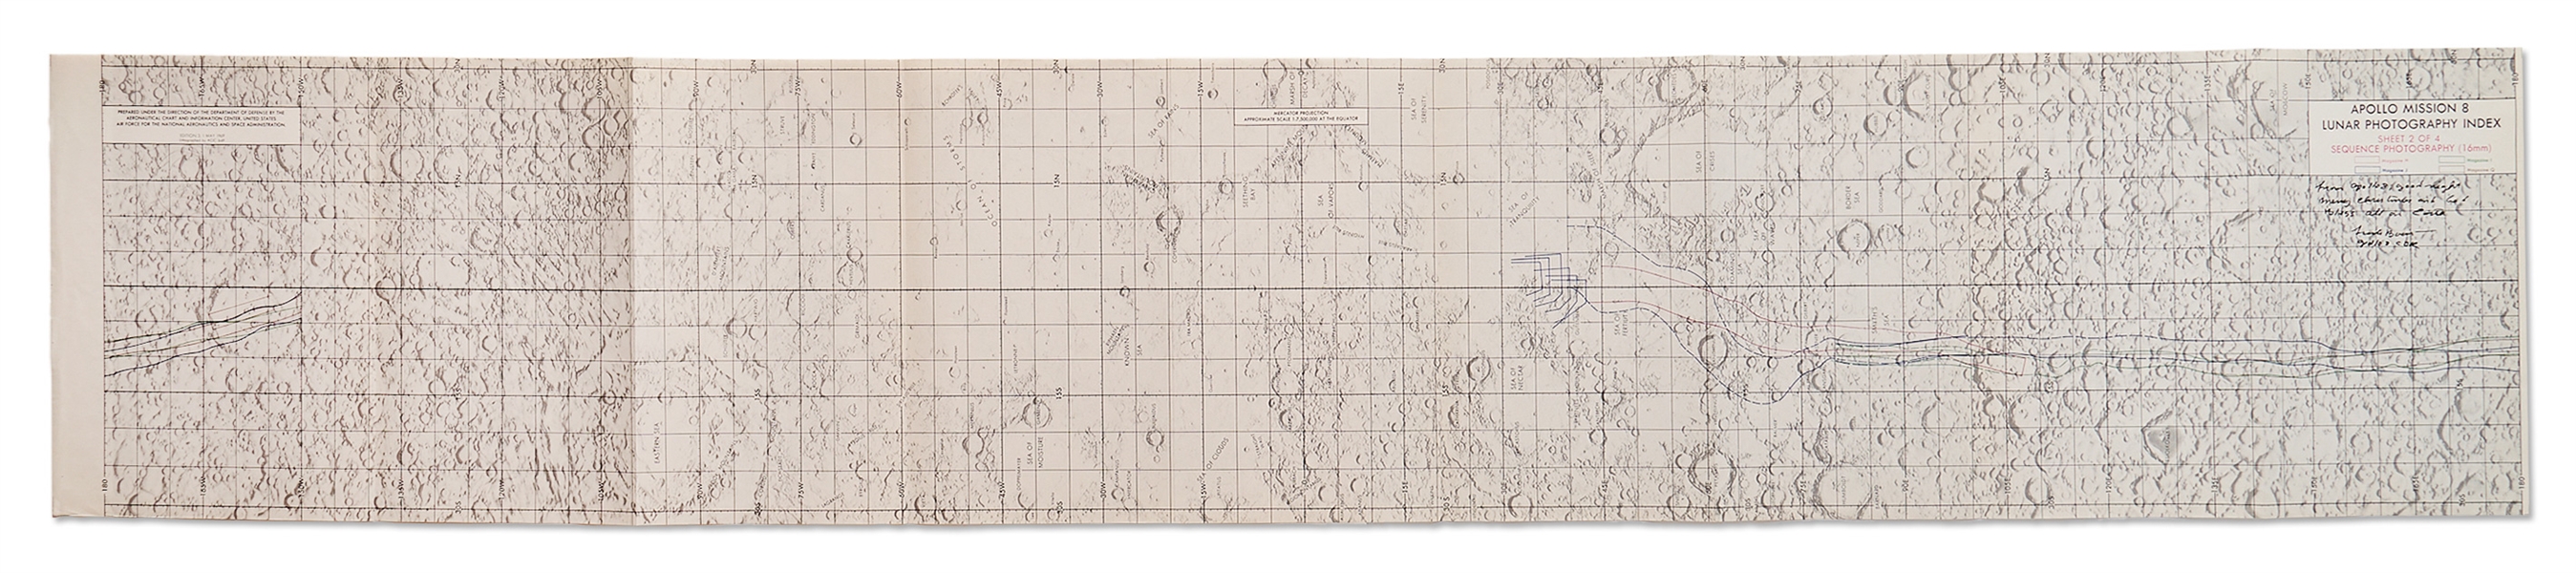 Frank Borman Signed Apollo 8 Map -- Borman Also Writes His Historic Words From the 1968 Christmas Eve Broadcast